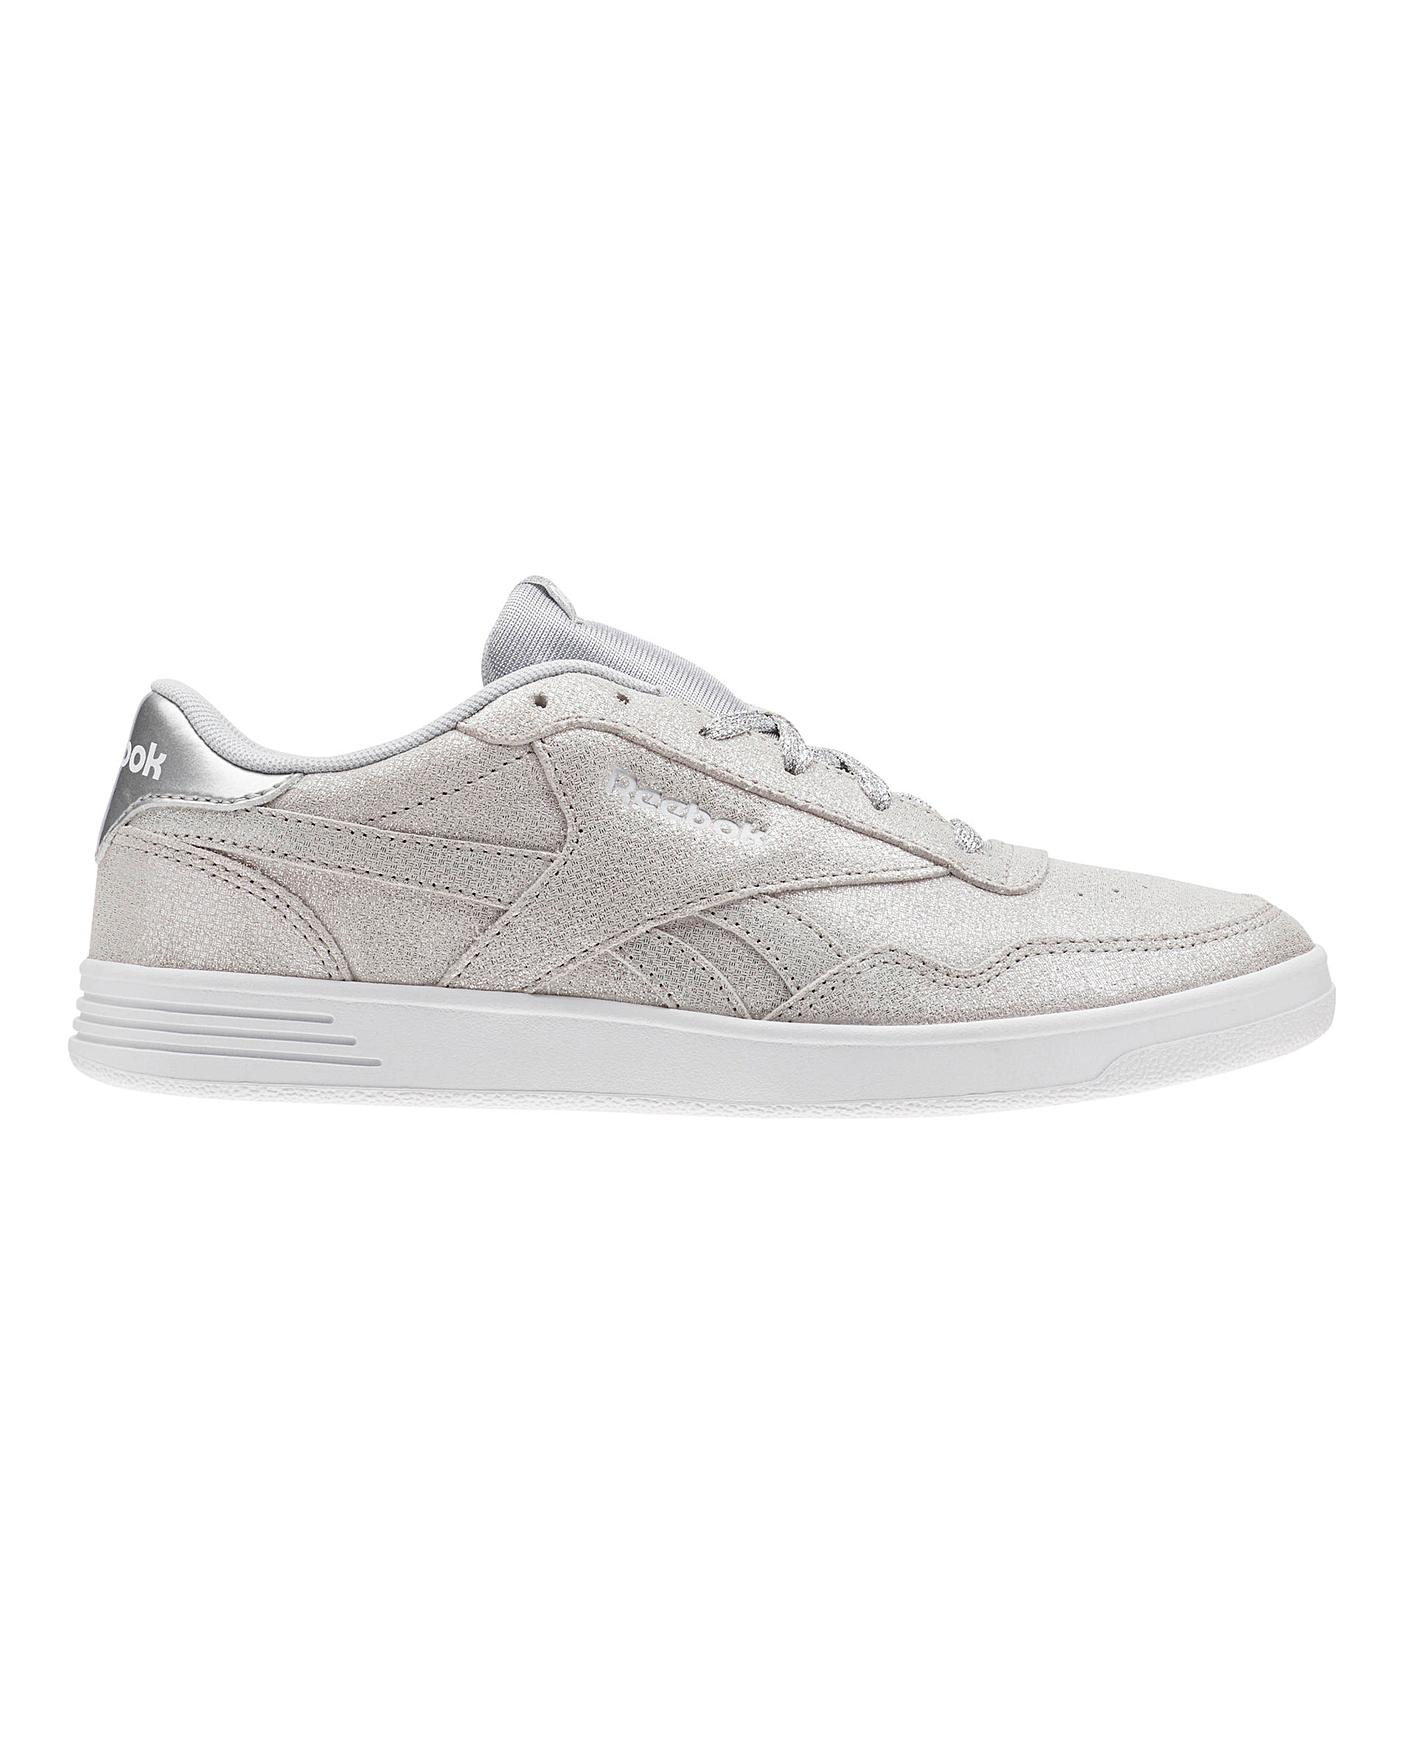 Reebok Royal Technique Trainers | Simply Be